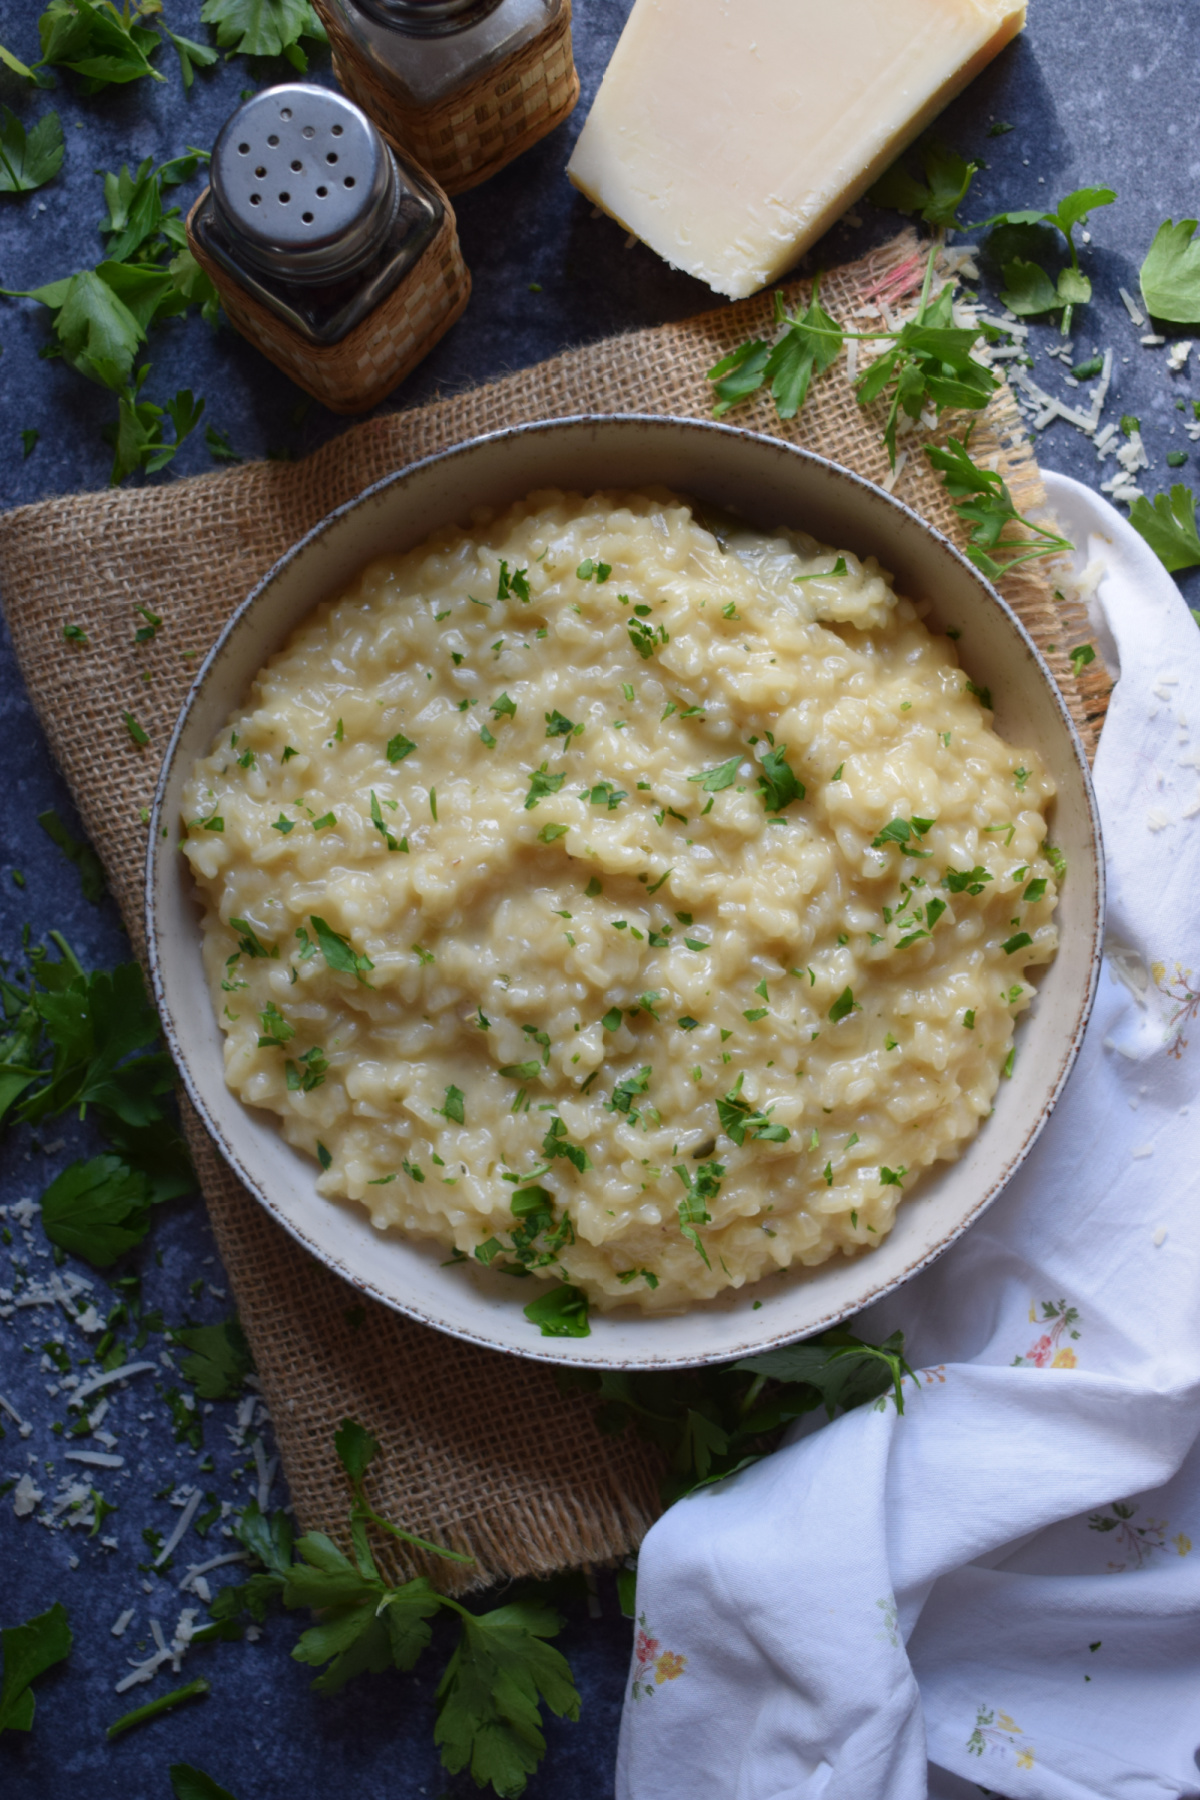 How to Make Risotto (Easy, Creamy 20-Minute Stovetop Recipe)